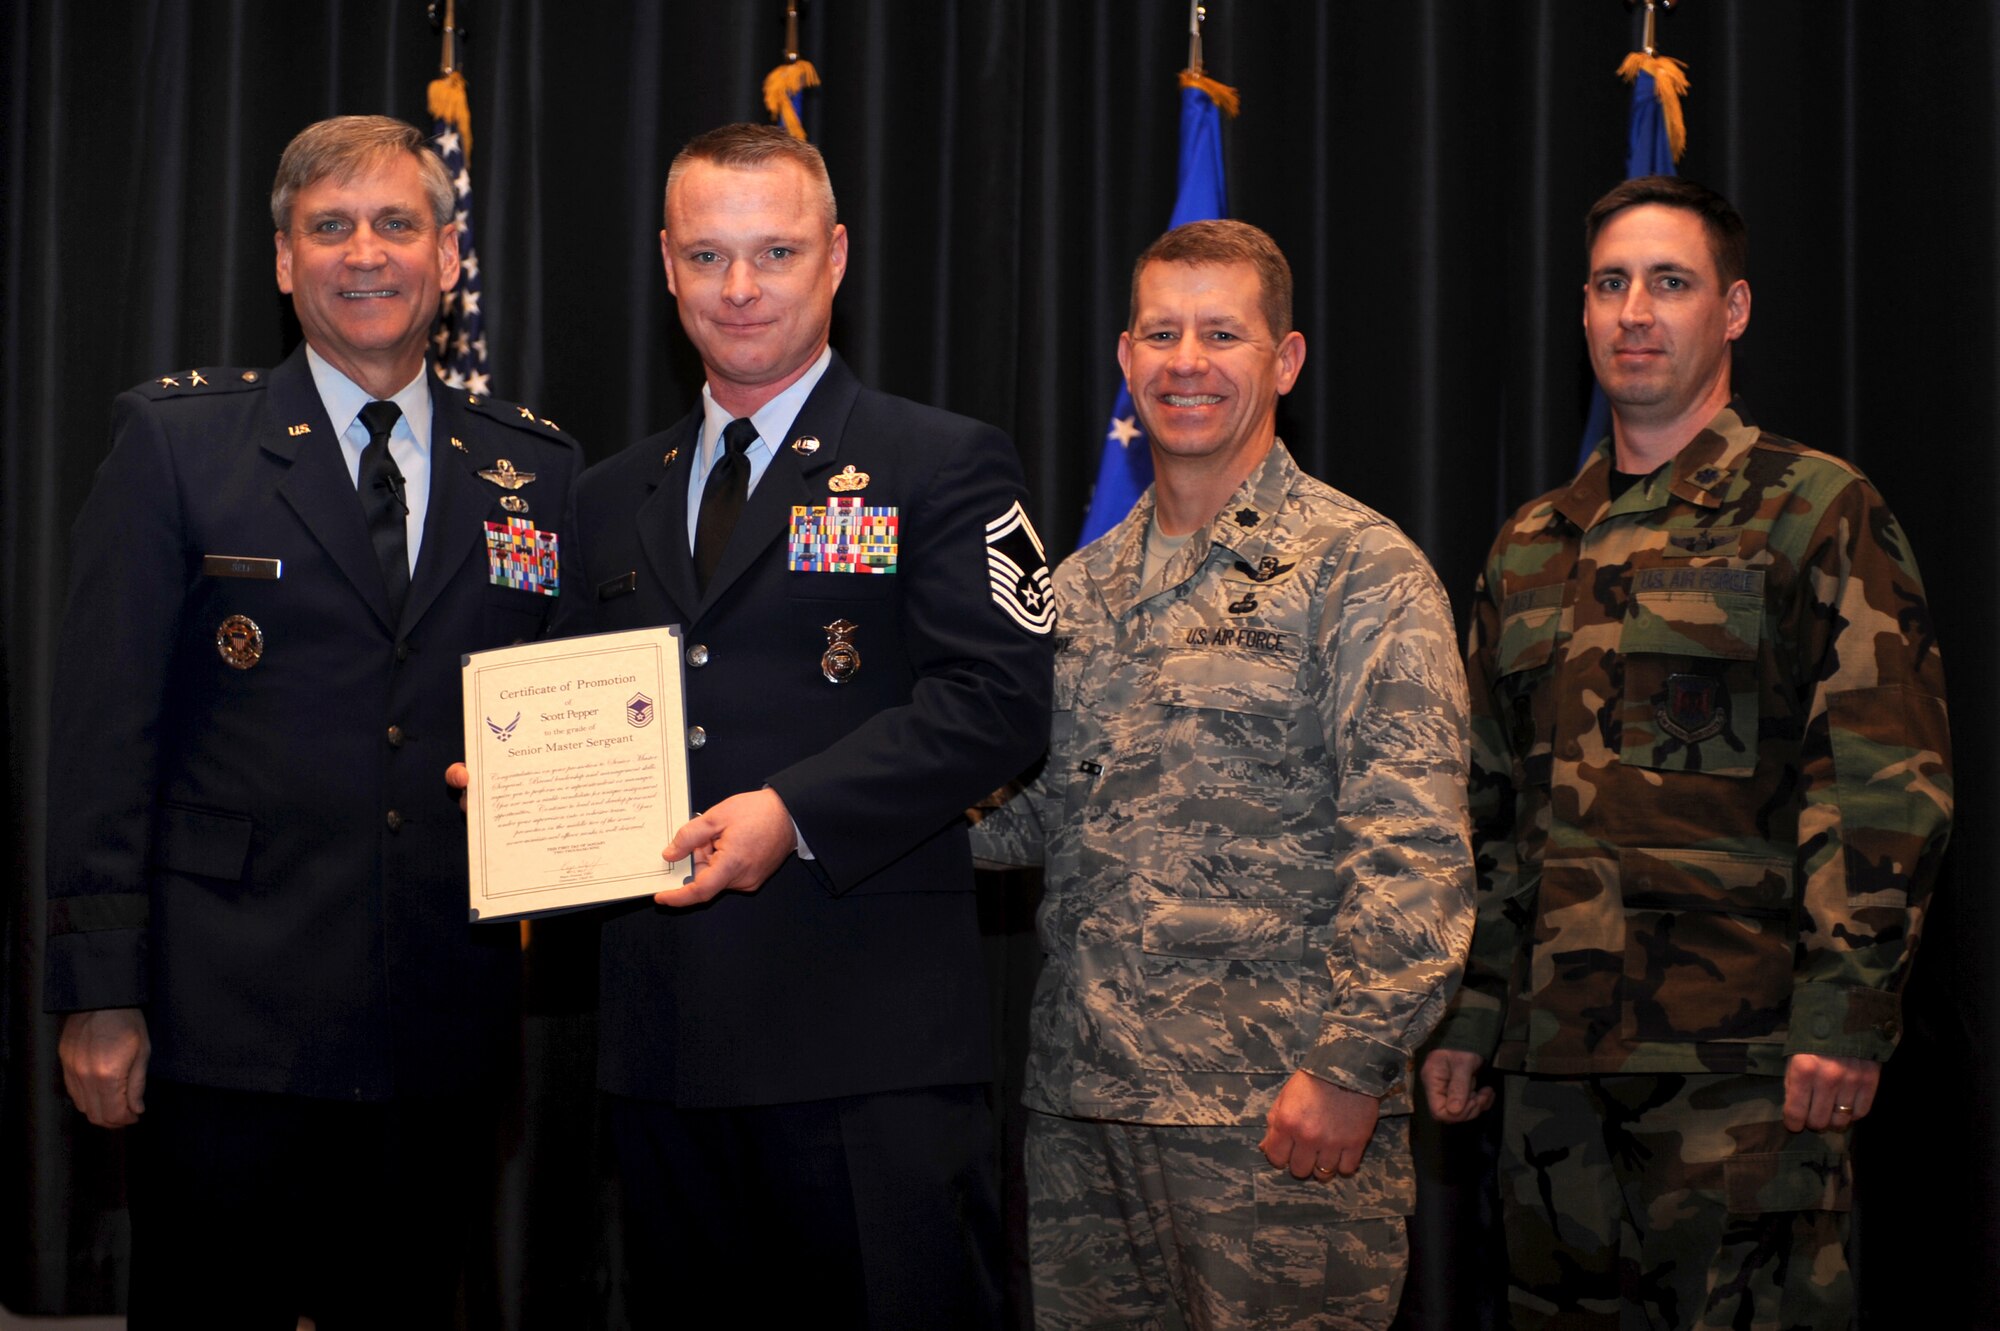 Maj. Gen. Kip Self, U.S. Air Force Expeditionary Center commander, presents Senior Master Sgt. Scott Pepper, 421st Combat Training Squadron superintendent, with a certificate of promotion during the Expeditionary Center's promotion ceremony Jan. 8, 2009, on Fort Dix, N.J.  Also pictured are Lt. Col. Mitchell Monroe, 421st CTS commander, and Lt. Col. Matthew Lacy, 421st CTS director of operations, who helped tack on Seergeant Pepper's stripes.  Sergeant Pepper's effective date of promotion was Jan. 1.  (U.S. Air Force Photo/Staff Sgt. Nathan Bevier)